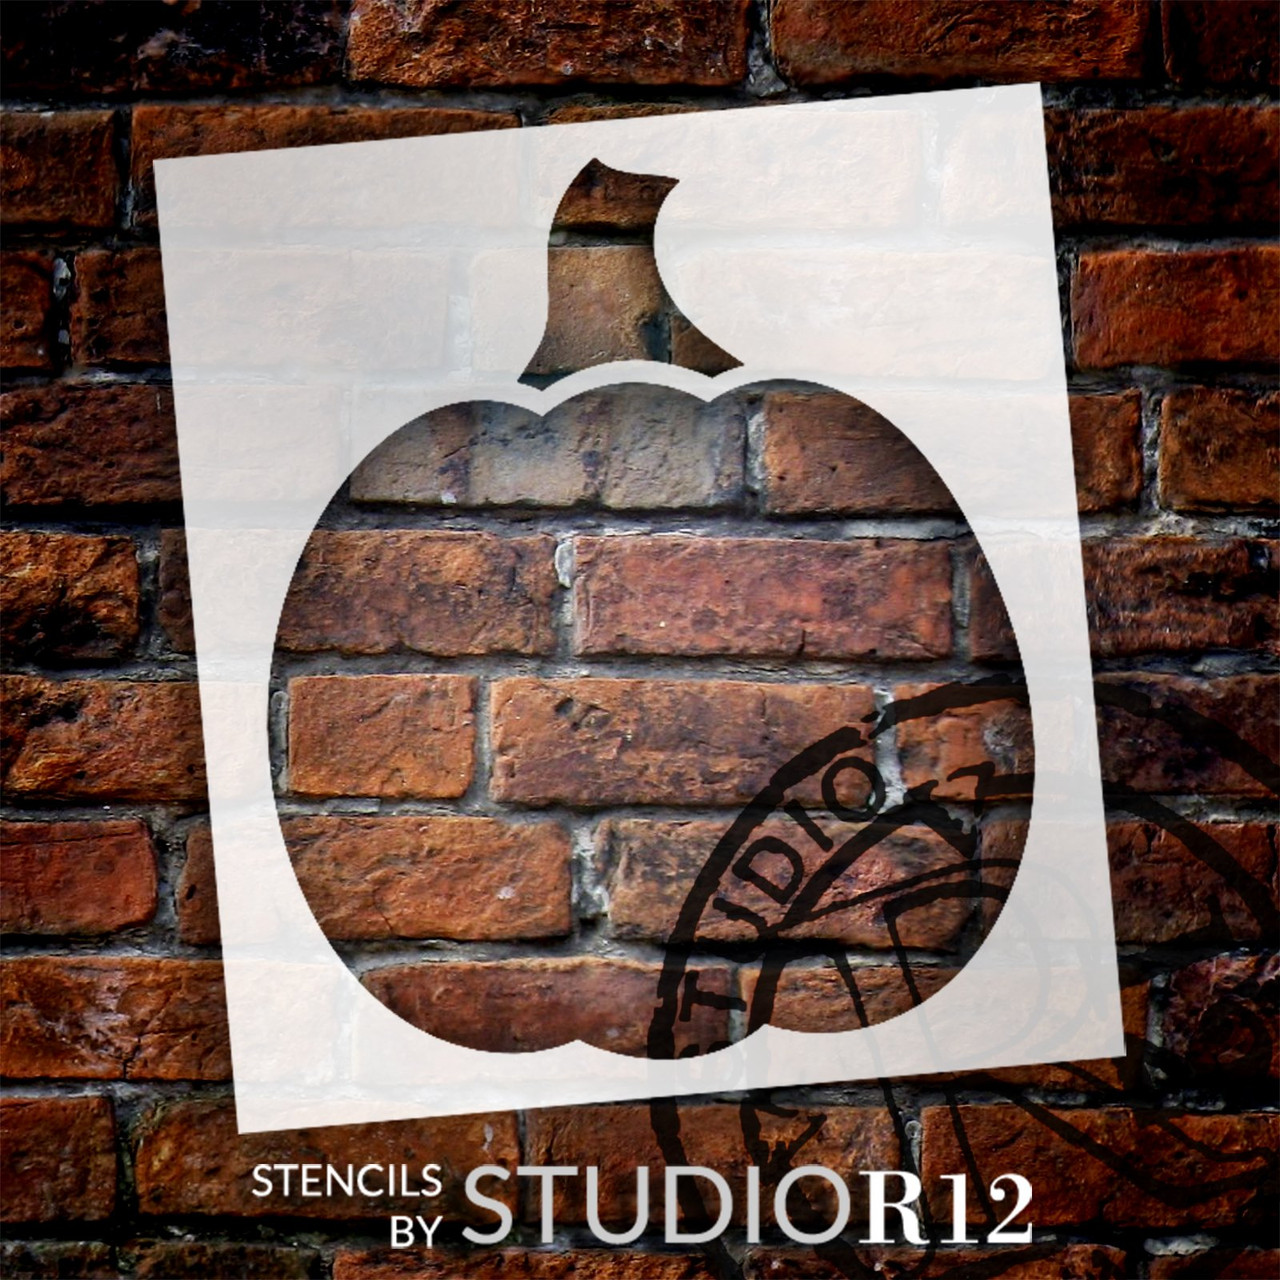 Round Pumpkin Shape Silhouette Stencil by StudioR12 - Select Size - USA Made - Craft DIY Rustic Fall Kitchen Decor | Paint Wood Sign Door Hanger